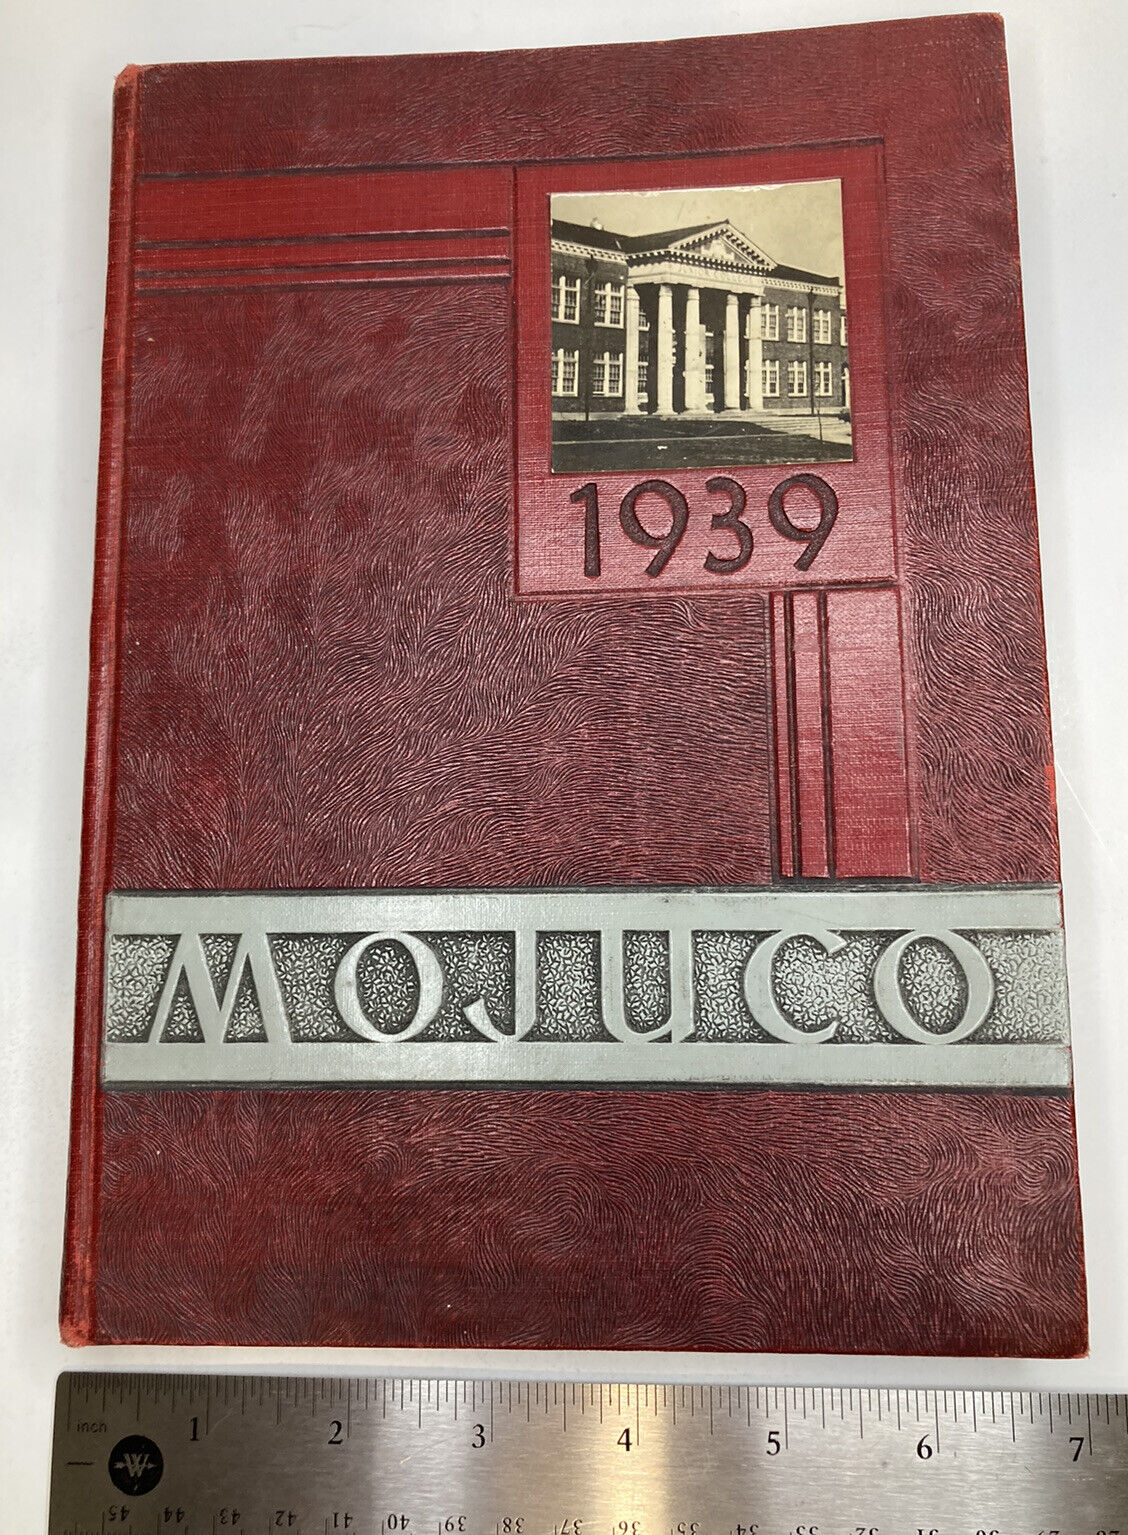 Moberly Junior College 1939 Yearbook ‘Mojuco’, Signatures Moberly, MO 7x9”